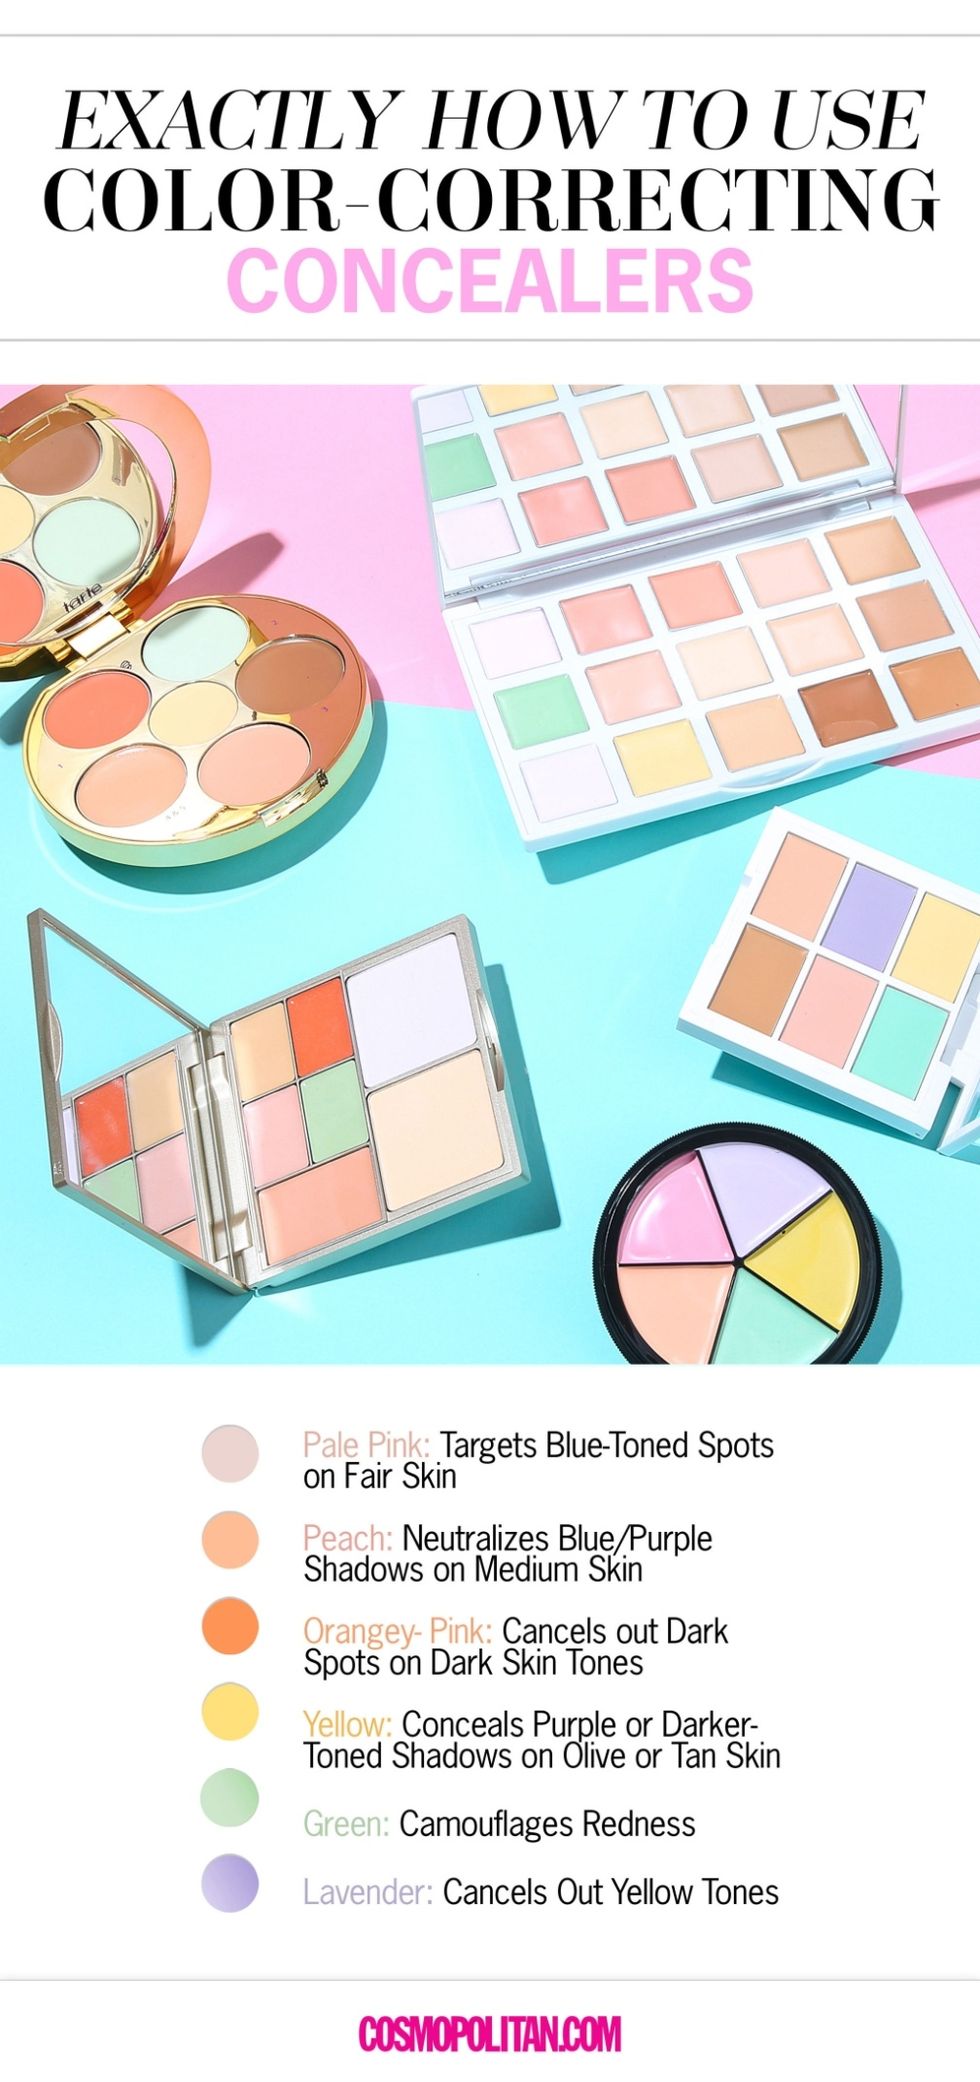 Colorfulness, Peach, Rectangle, Square, Illustration, Paint, Cosmetics, Games, Egg, Egg, 